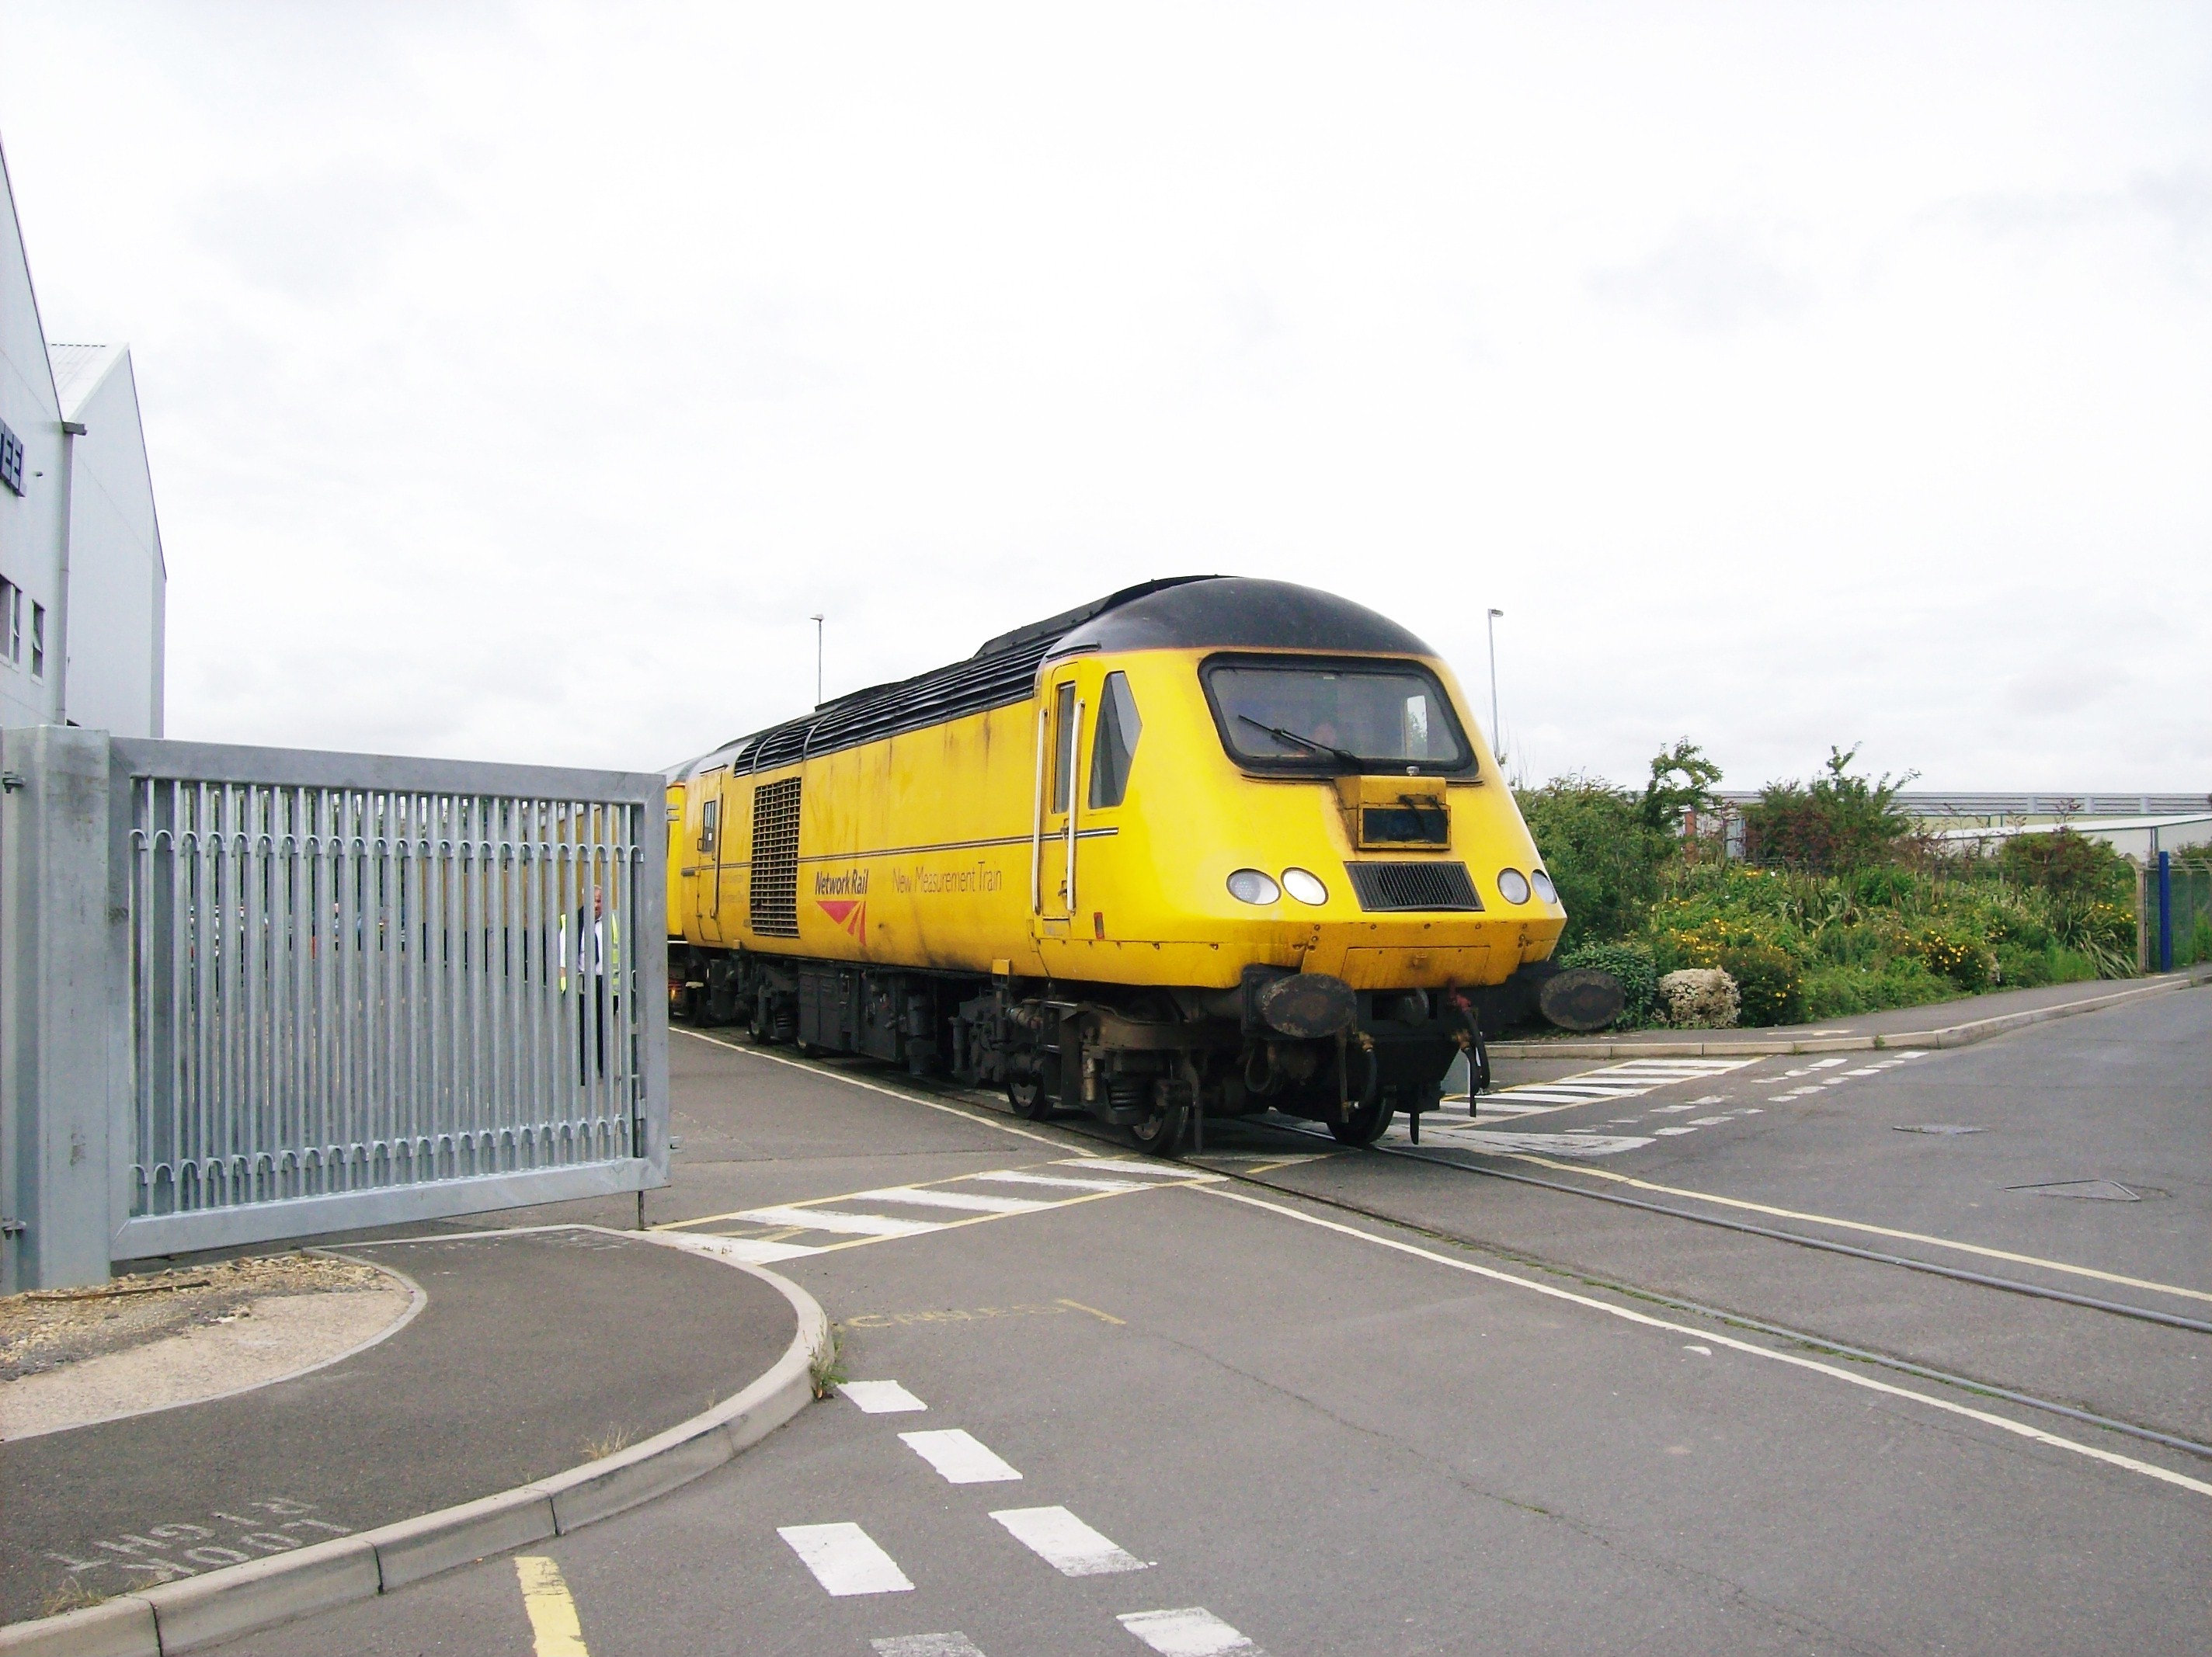 43014, in yellow livery with Network Rail New Measurement Train branding, arriving at Brush, Loughborough on 3rd August 2009 for re-engineering, which replaced its Paxman Valenta power unit with a MTU one; it departed from the works on 7th October. George Toms